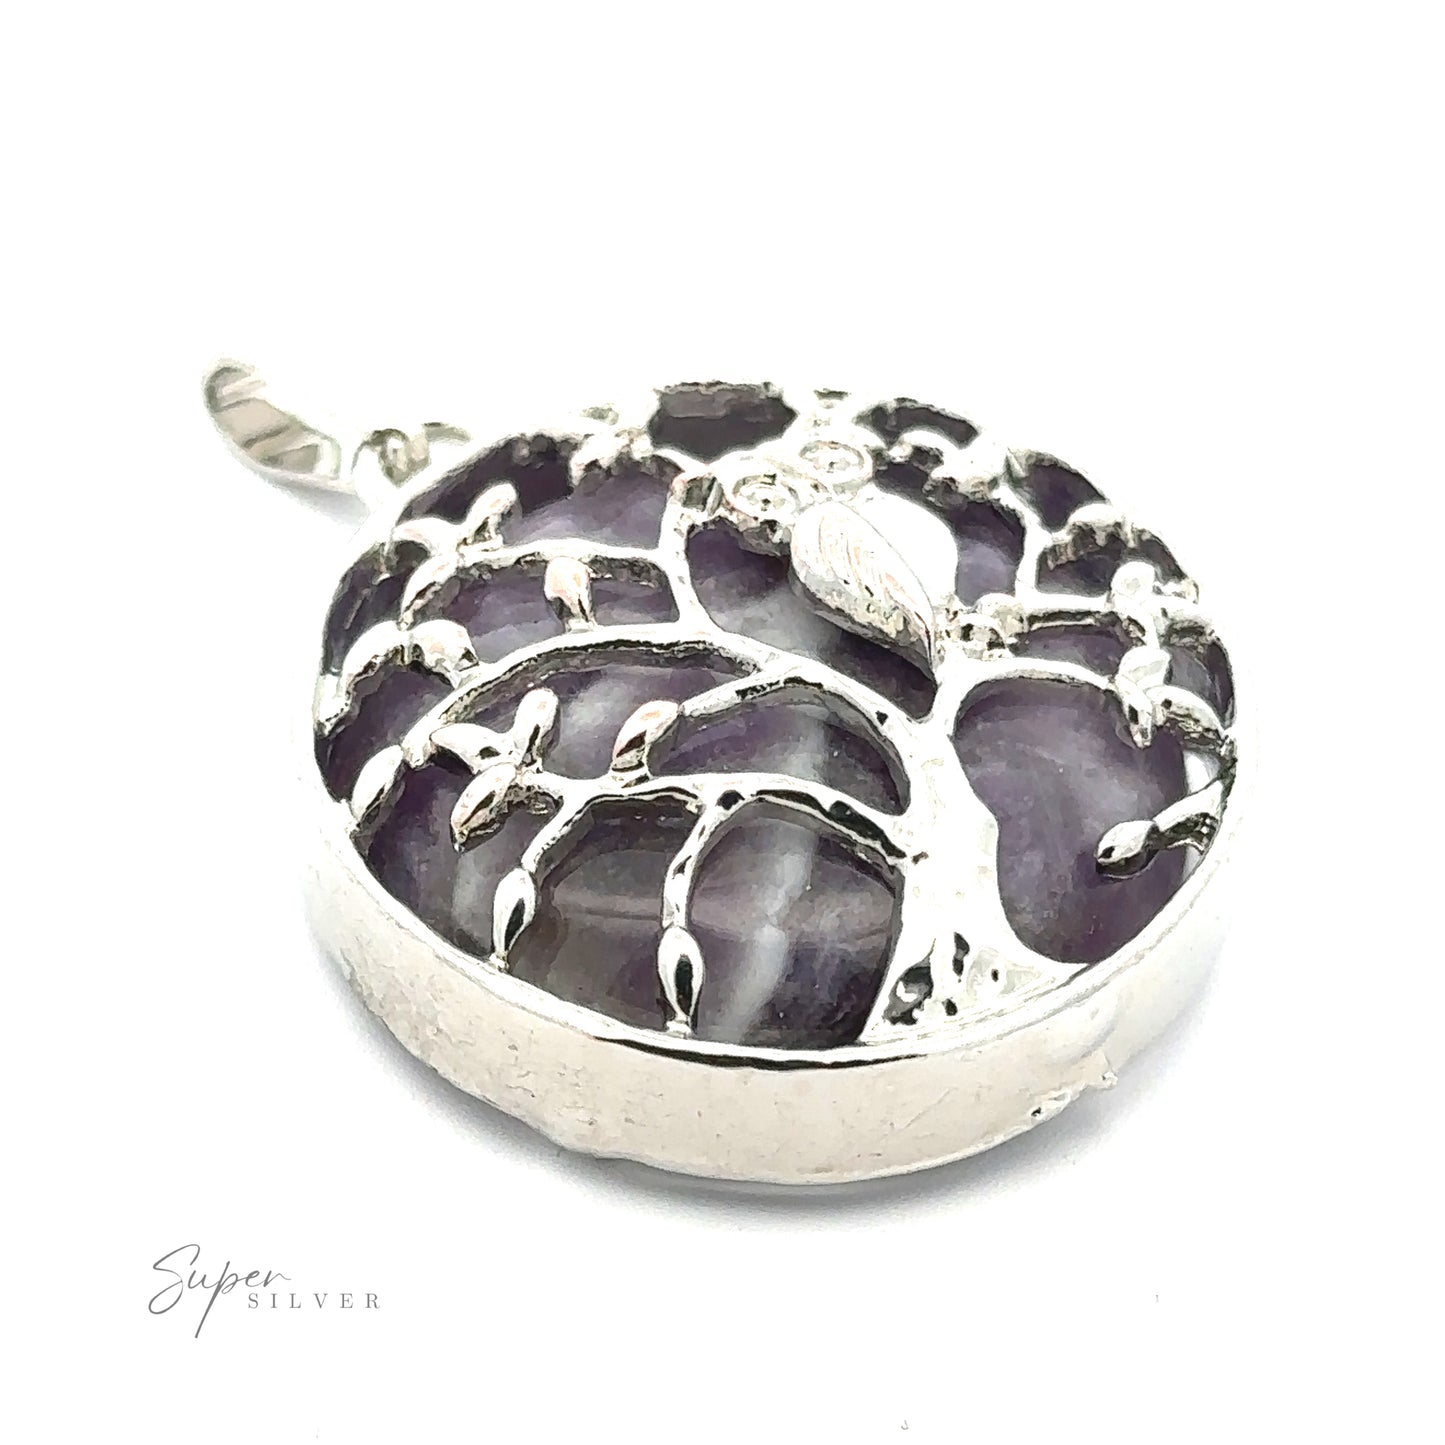 
                  
                    Round silver stone tree pendant with a tree design beautifully etched on top of a translucent Amethyst. The inscription "Super Silver" is elegantly visible on the bottom left. This Owl and Tree Pendant seamlessly blends style and elegance.
                  
                